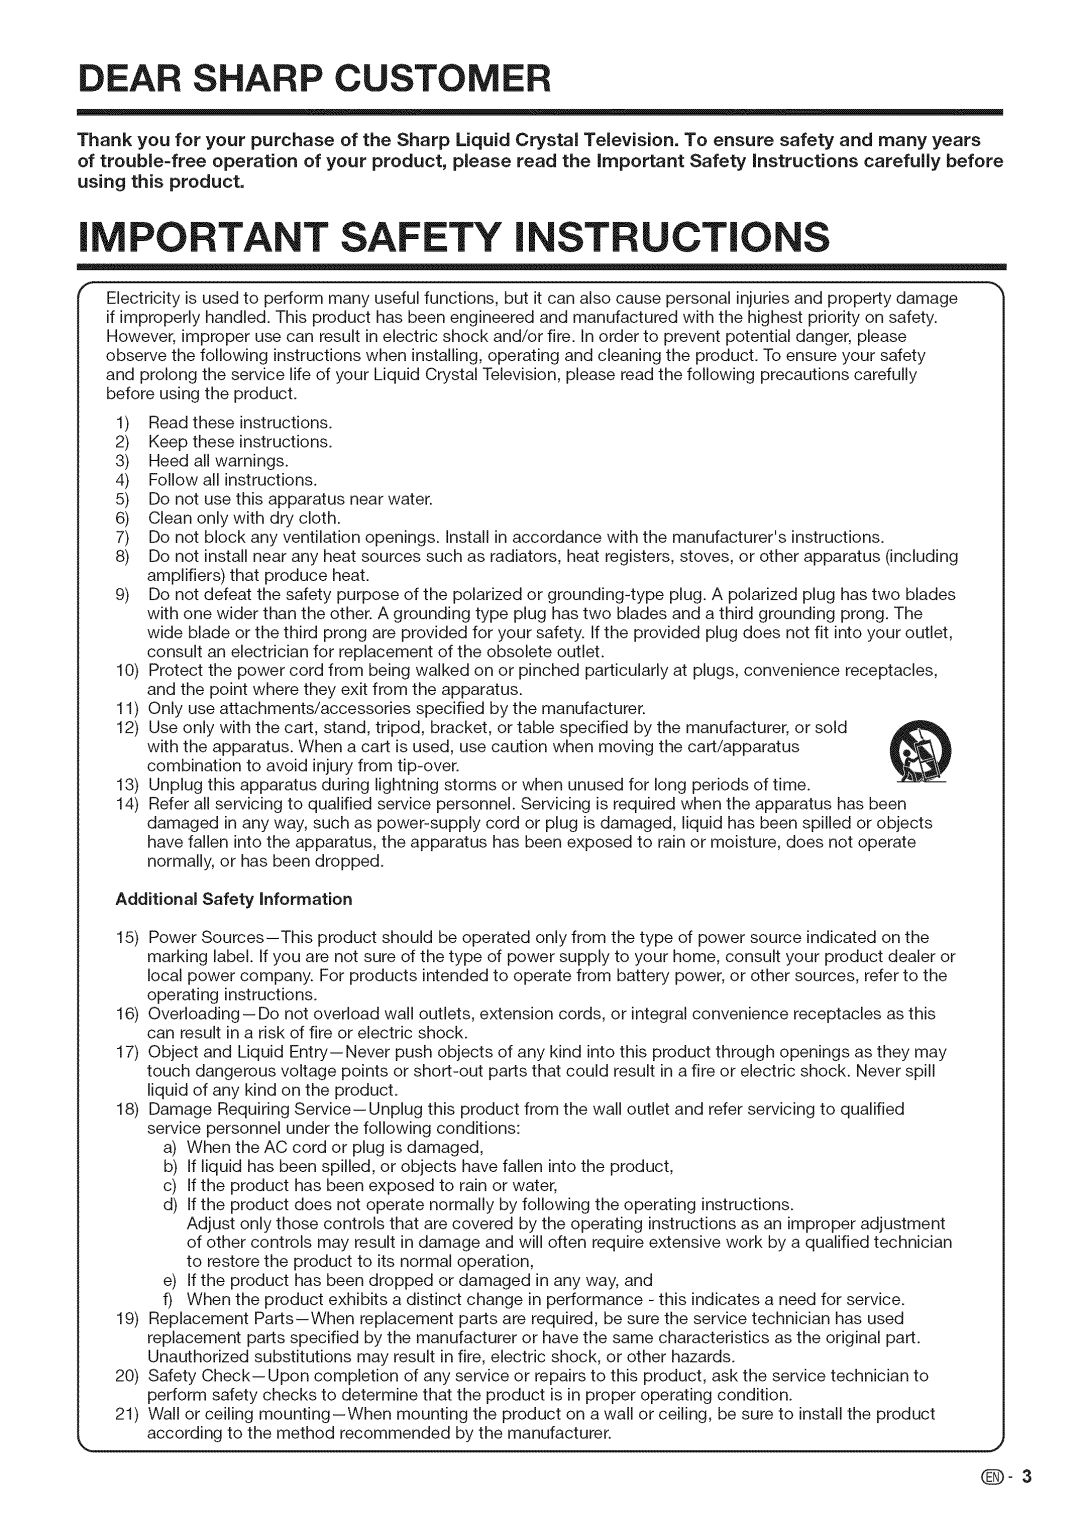 Sharp LC-40LE700, LC-52LE700, LC-46LE700 iMPORTANT SAFETY iNSTRUCTiONS, Dear Sharp Customer, Additional Safety Information 